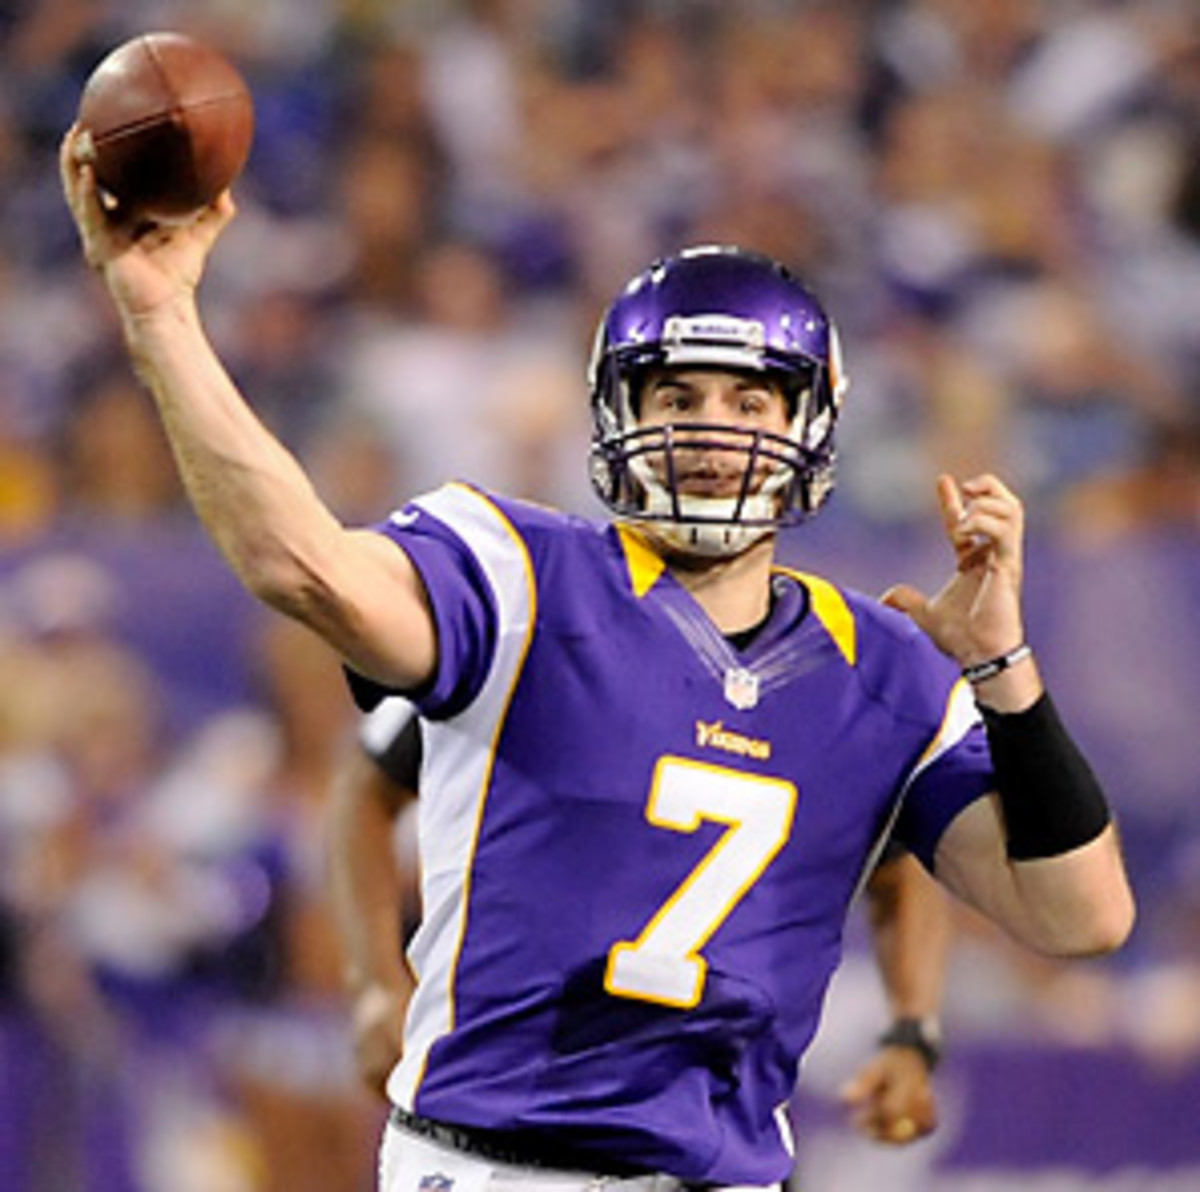 Christian Ponder posted an 81.2 rating in 2012, 11 points better than the mark from his rookie season.